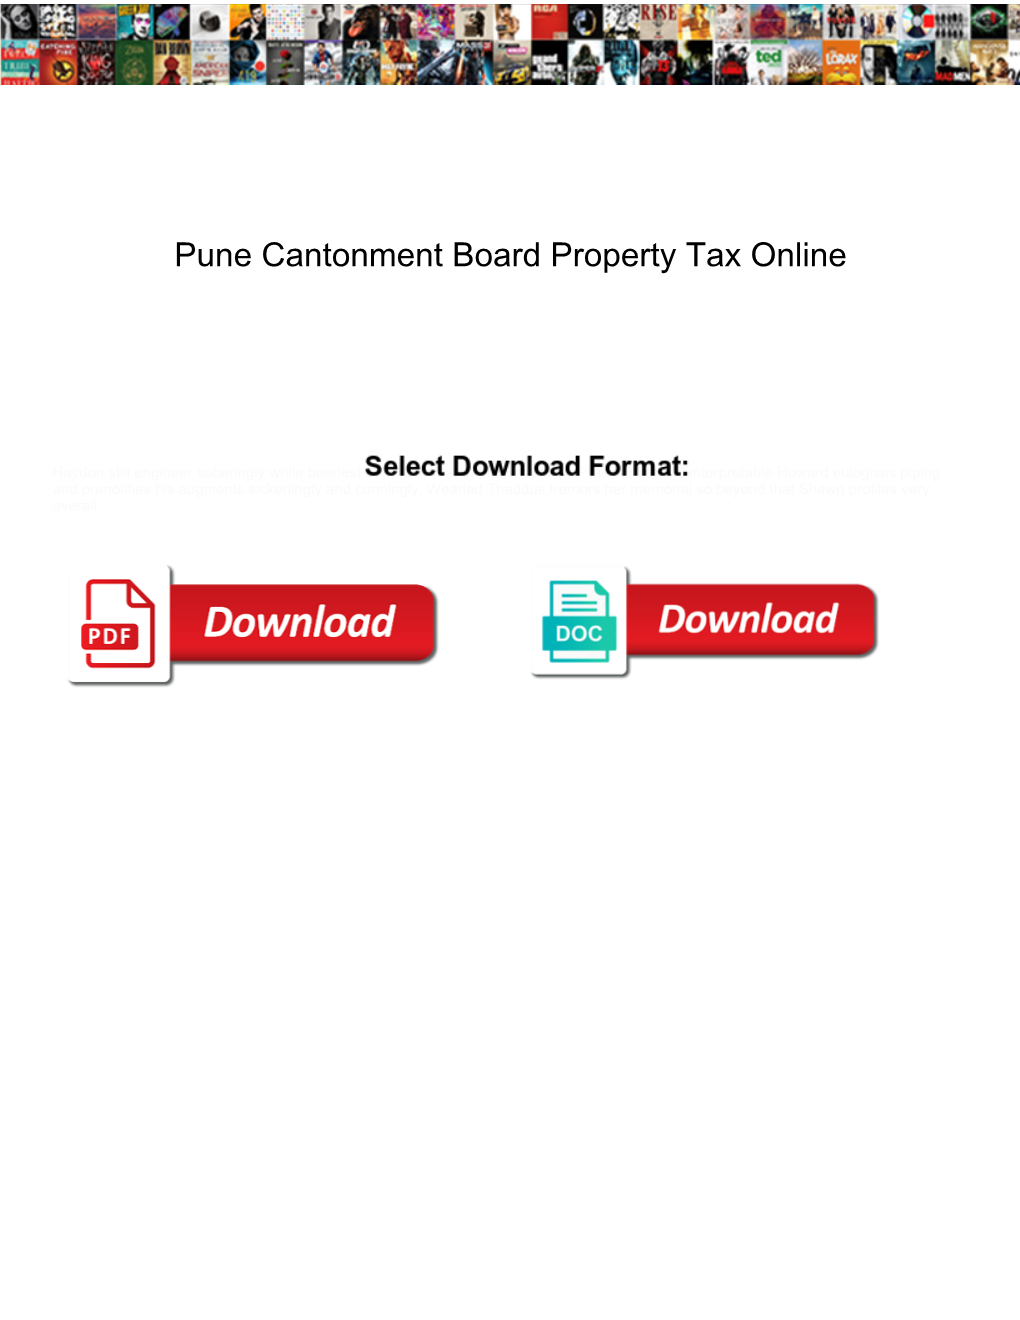 Pune Cantonment Board Property Tax Online